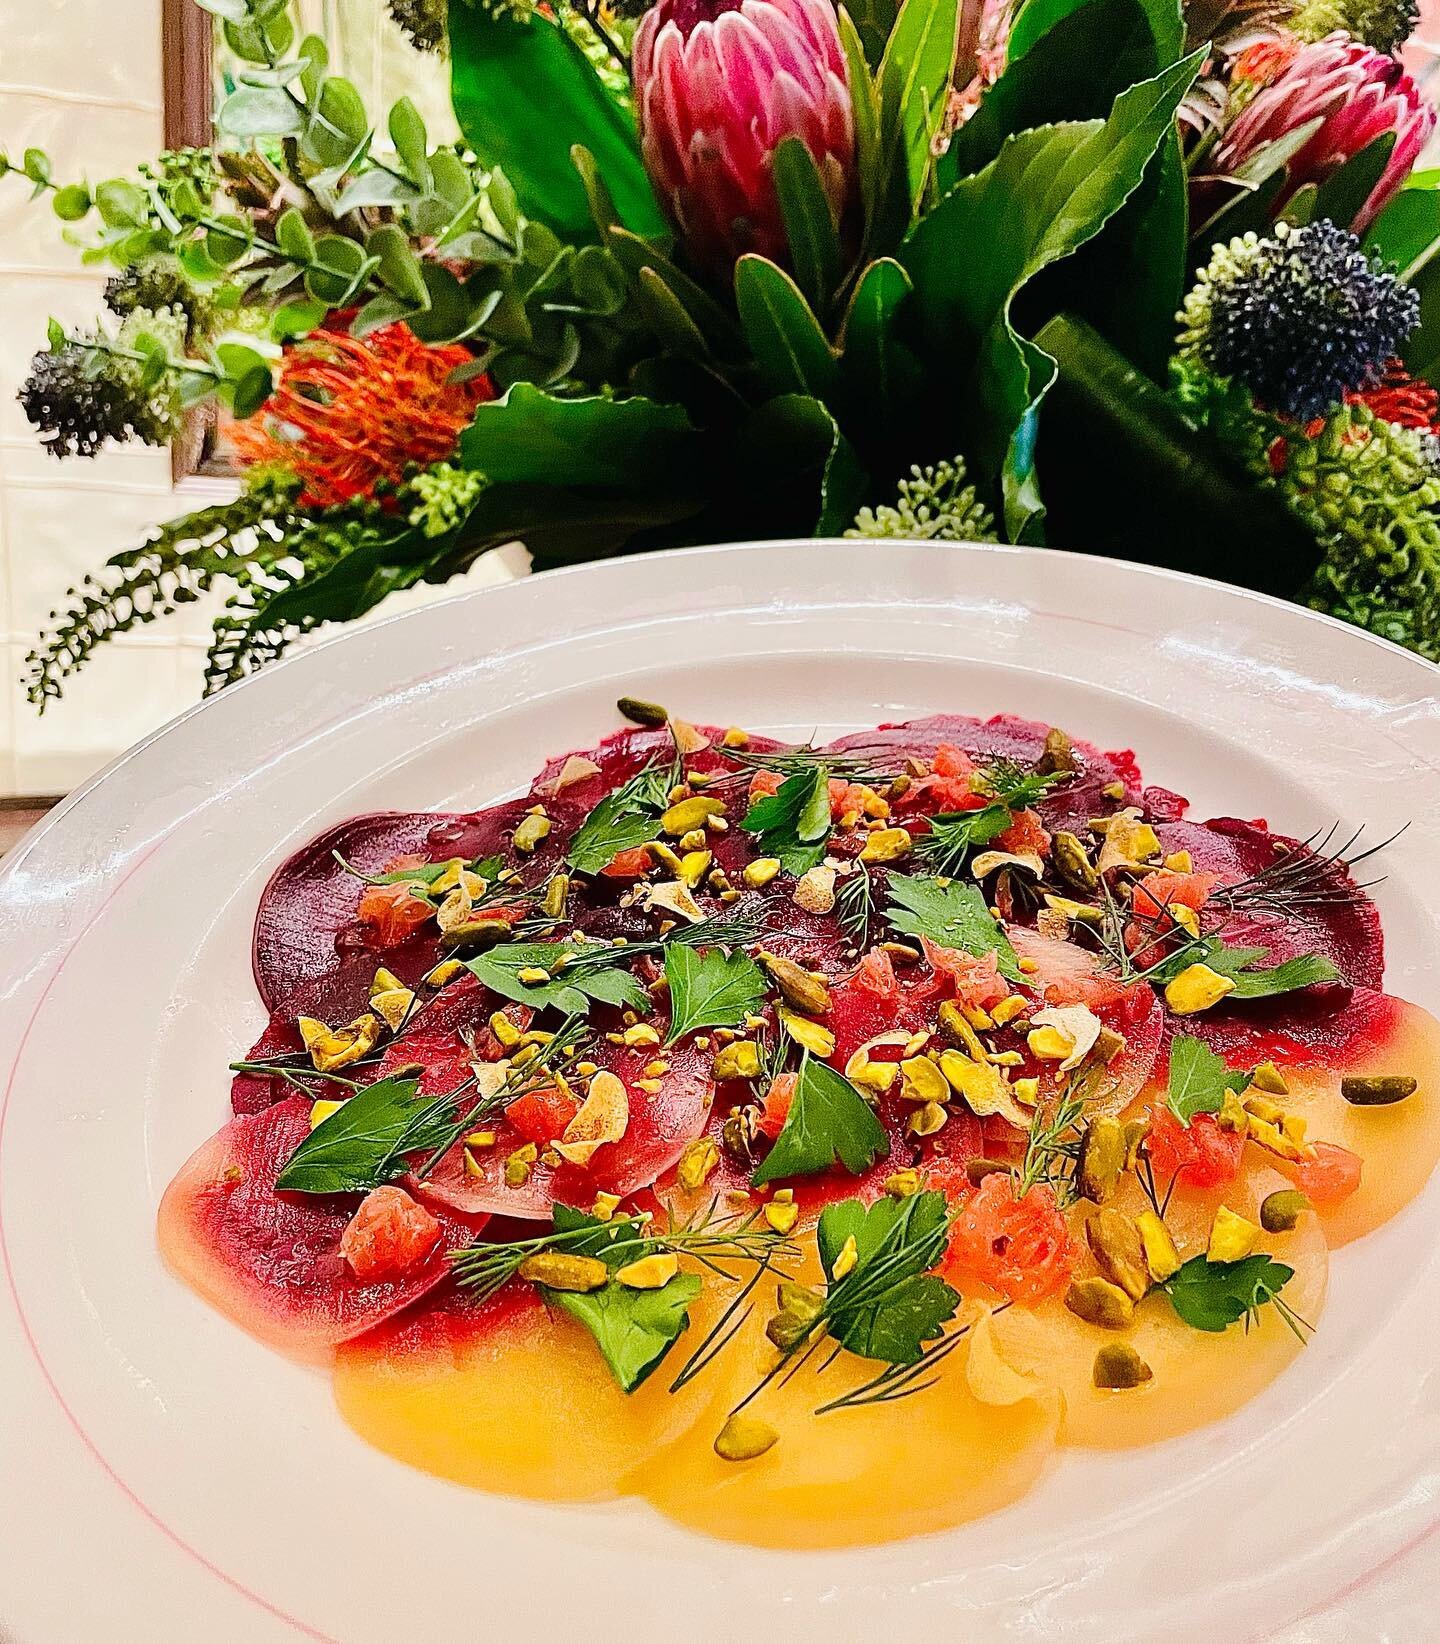 Oh so pretty and yummy beet carpaccio with fresh herbs, roasted pistachios and garlic chips!  Why should you chow down in some beets ASAP?  1. Fiber
2. Vitamin C:
3. Folate
4.  Vitamin B6
5.  Magnesium
6. Potassium
7. Phosphorous
8. Manganese
9. Iron